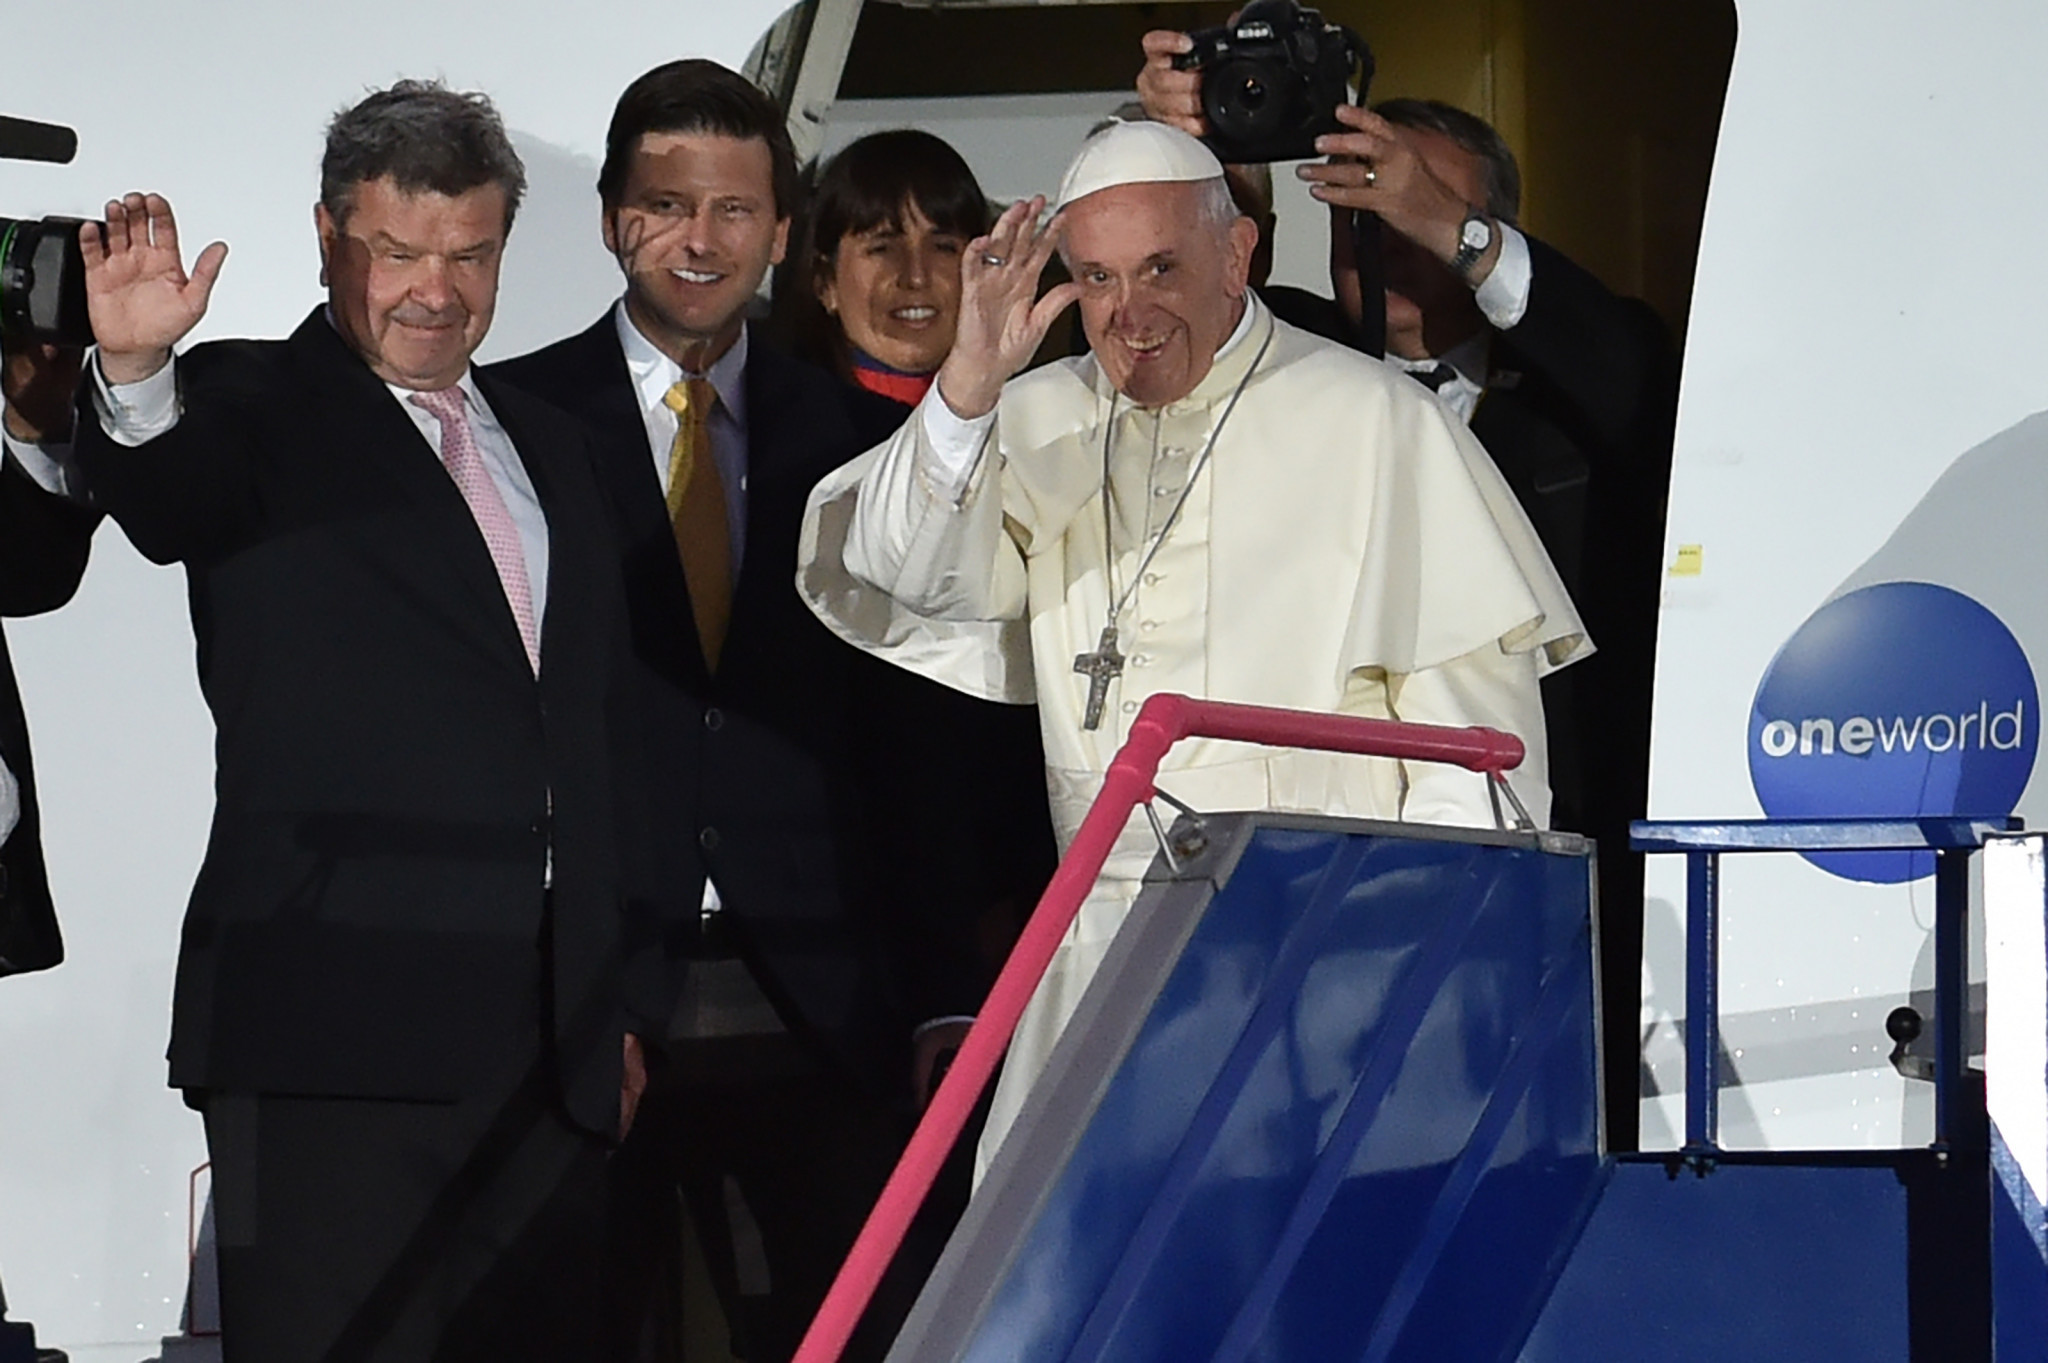 Lima 2019 claim visit of Pope Francis highlights city's capability to stage major events